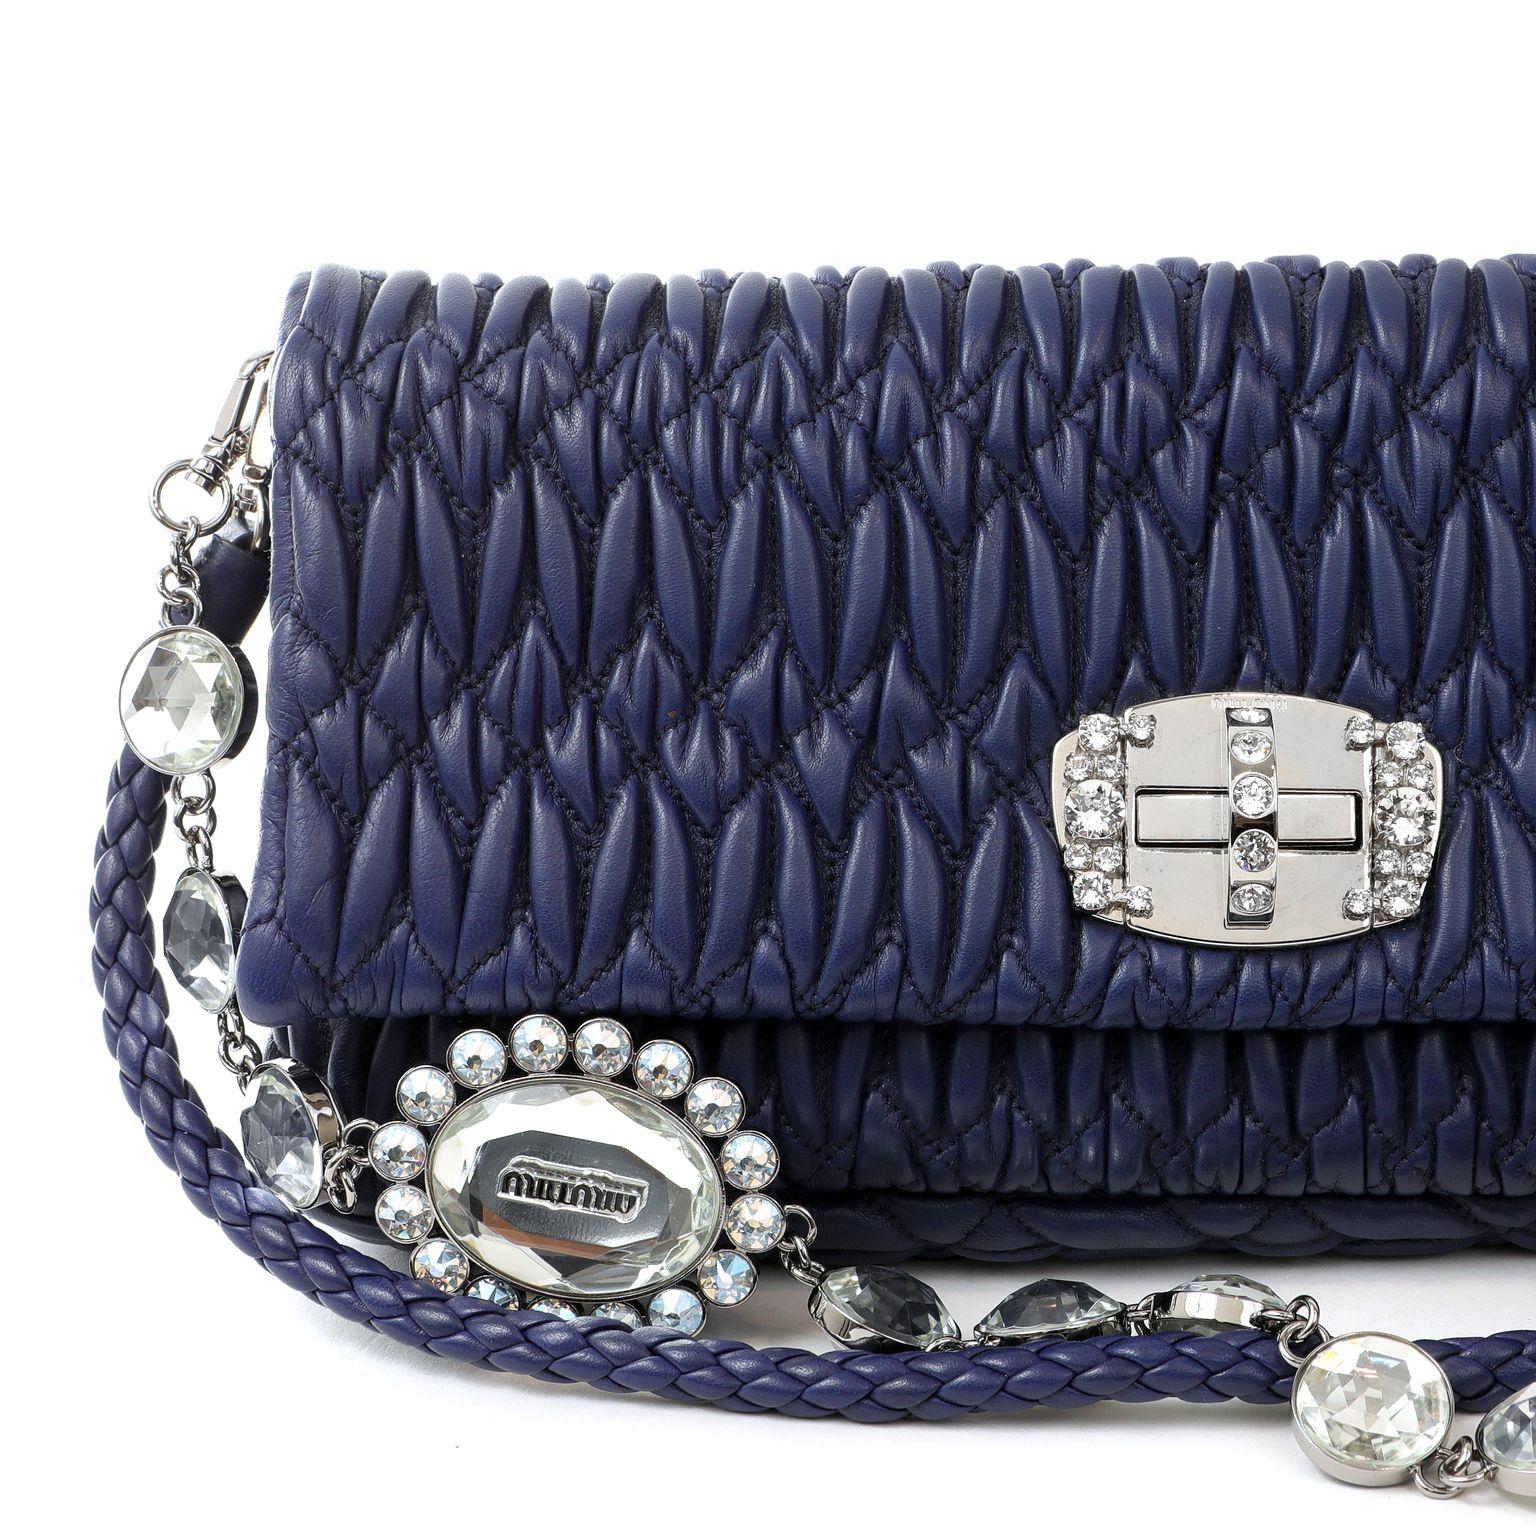 This authentic Miu Miu Royal Blue Crystal Cloquè Small Bag is in pristine condition.  The iconic design features blue quilted Nappa leather and a crystal turn lock closure.  May be carried by the detachable leather strap or the decorative crystal